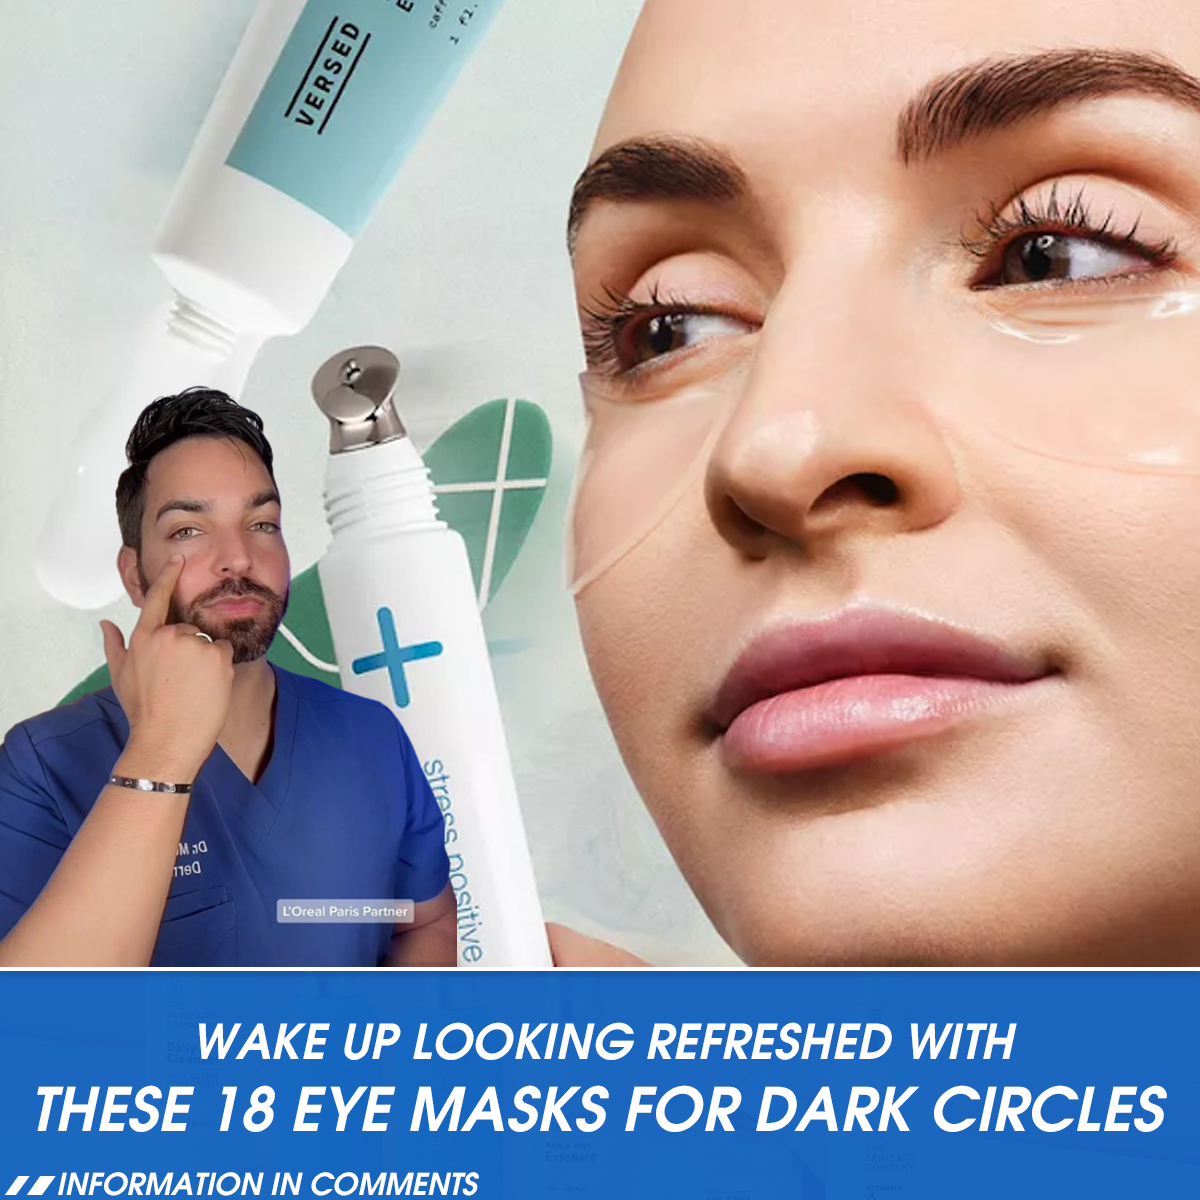 Wake Up Looking Refreshed With These 18 Eye Masks for Dark Circles